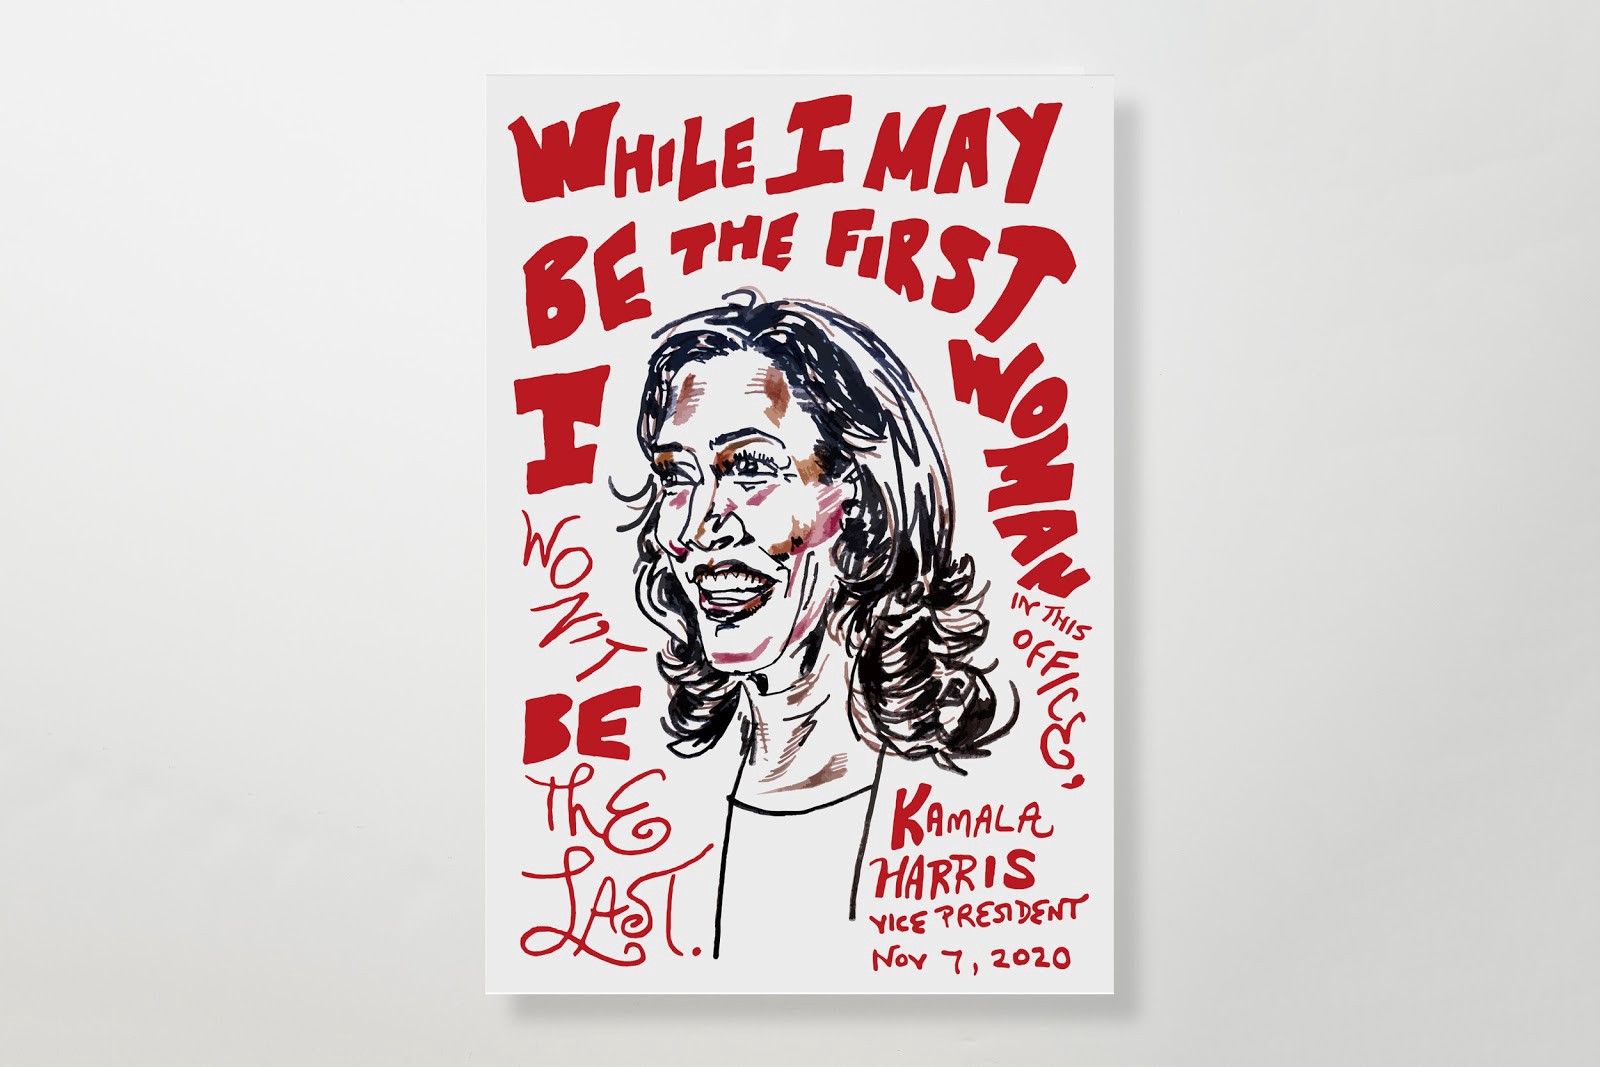 Painting of vice president Kamala Harris with text of her quote “While I may be the first woman in the office, I won’t be the last,” dated November 7, 2020.